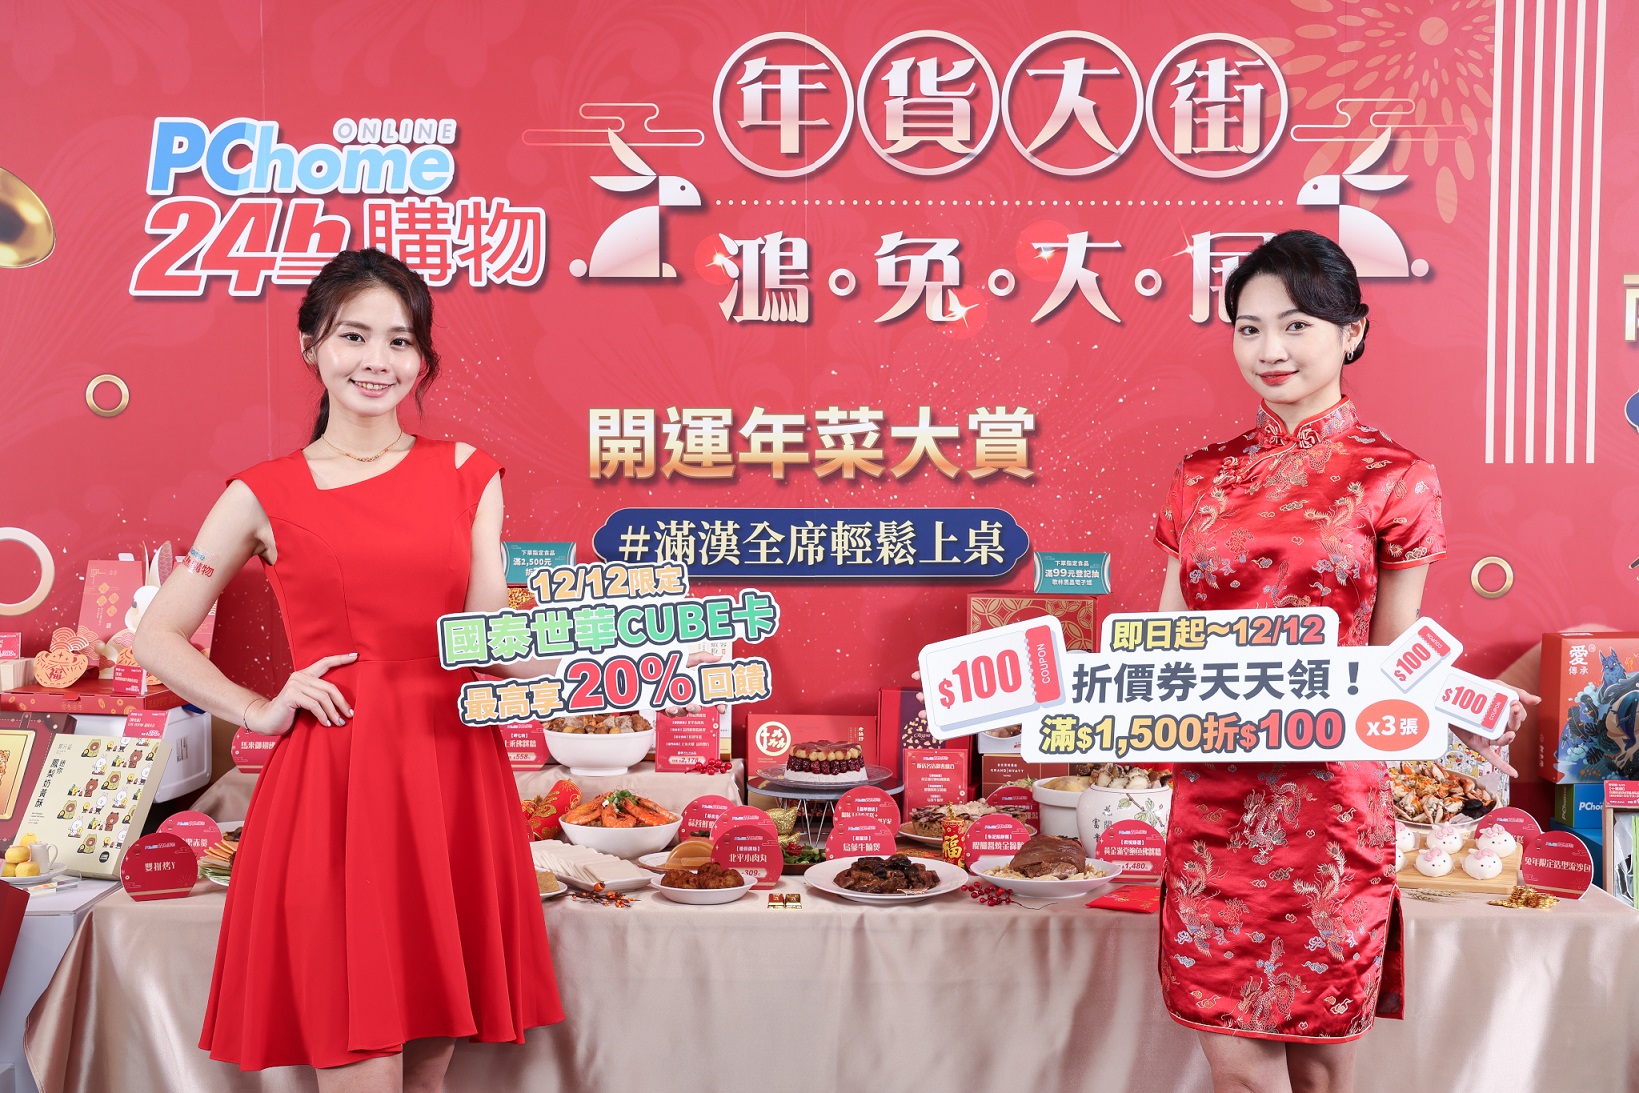 Lunar New Year Market Opens at PChome 24h Shopping and Sales of Pre-Ordered New Year Dishes Double!